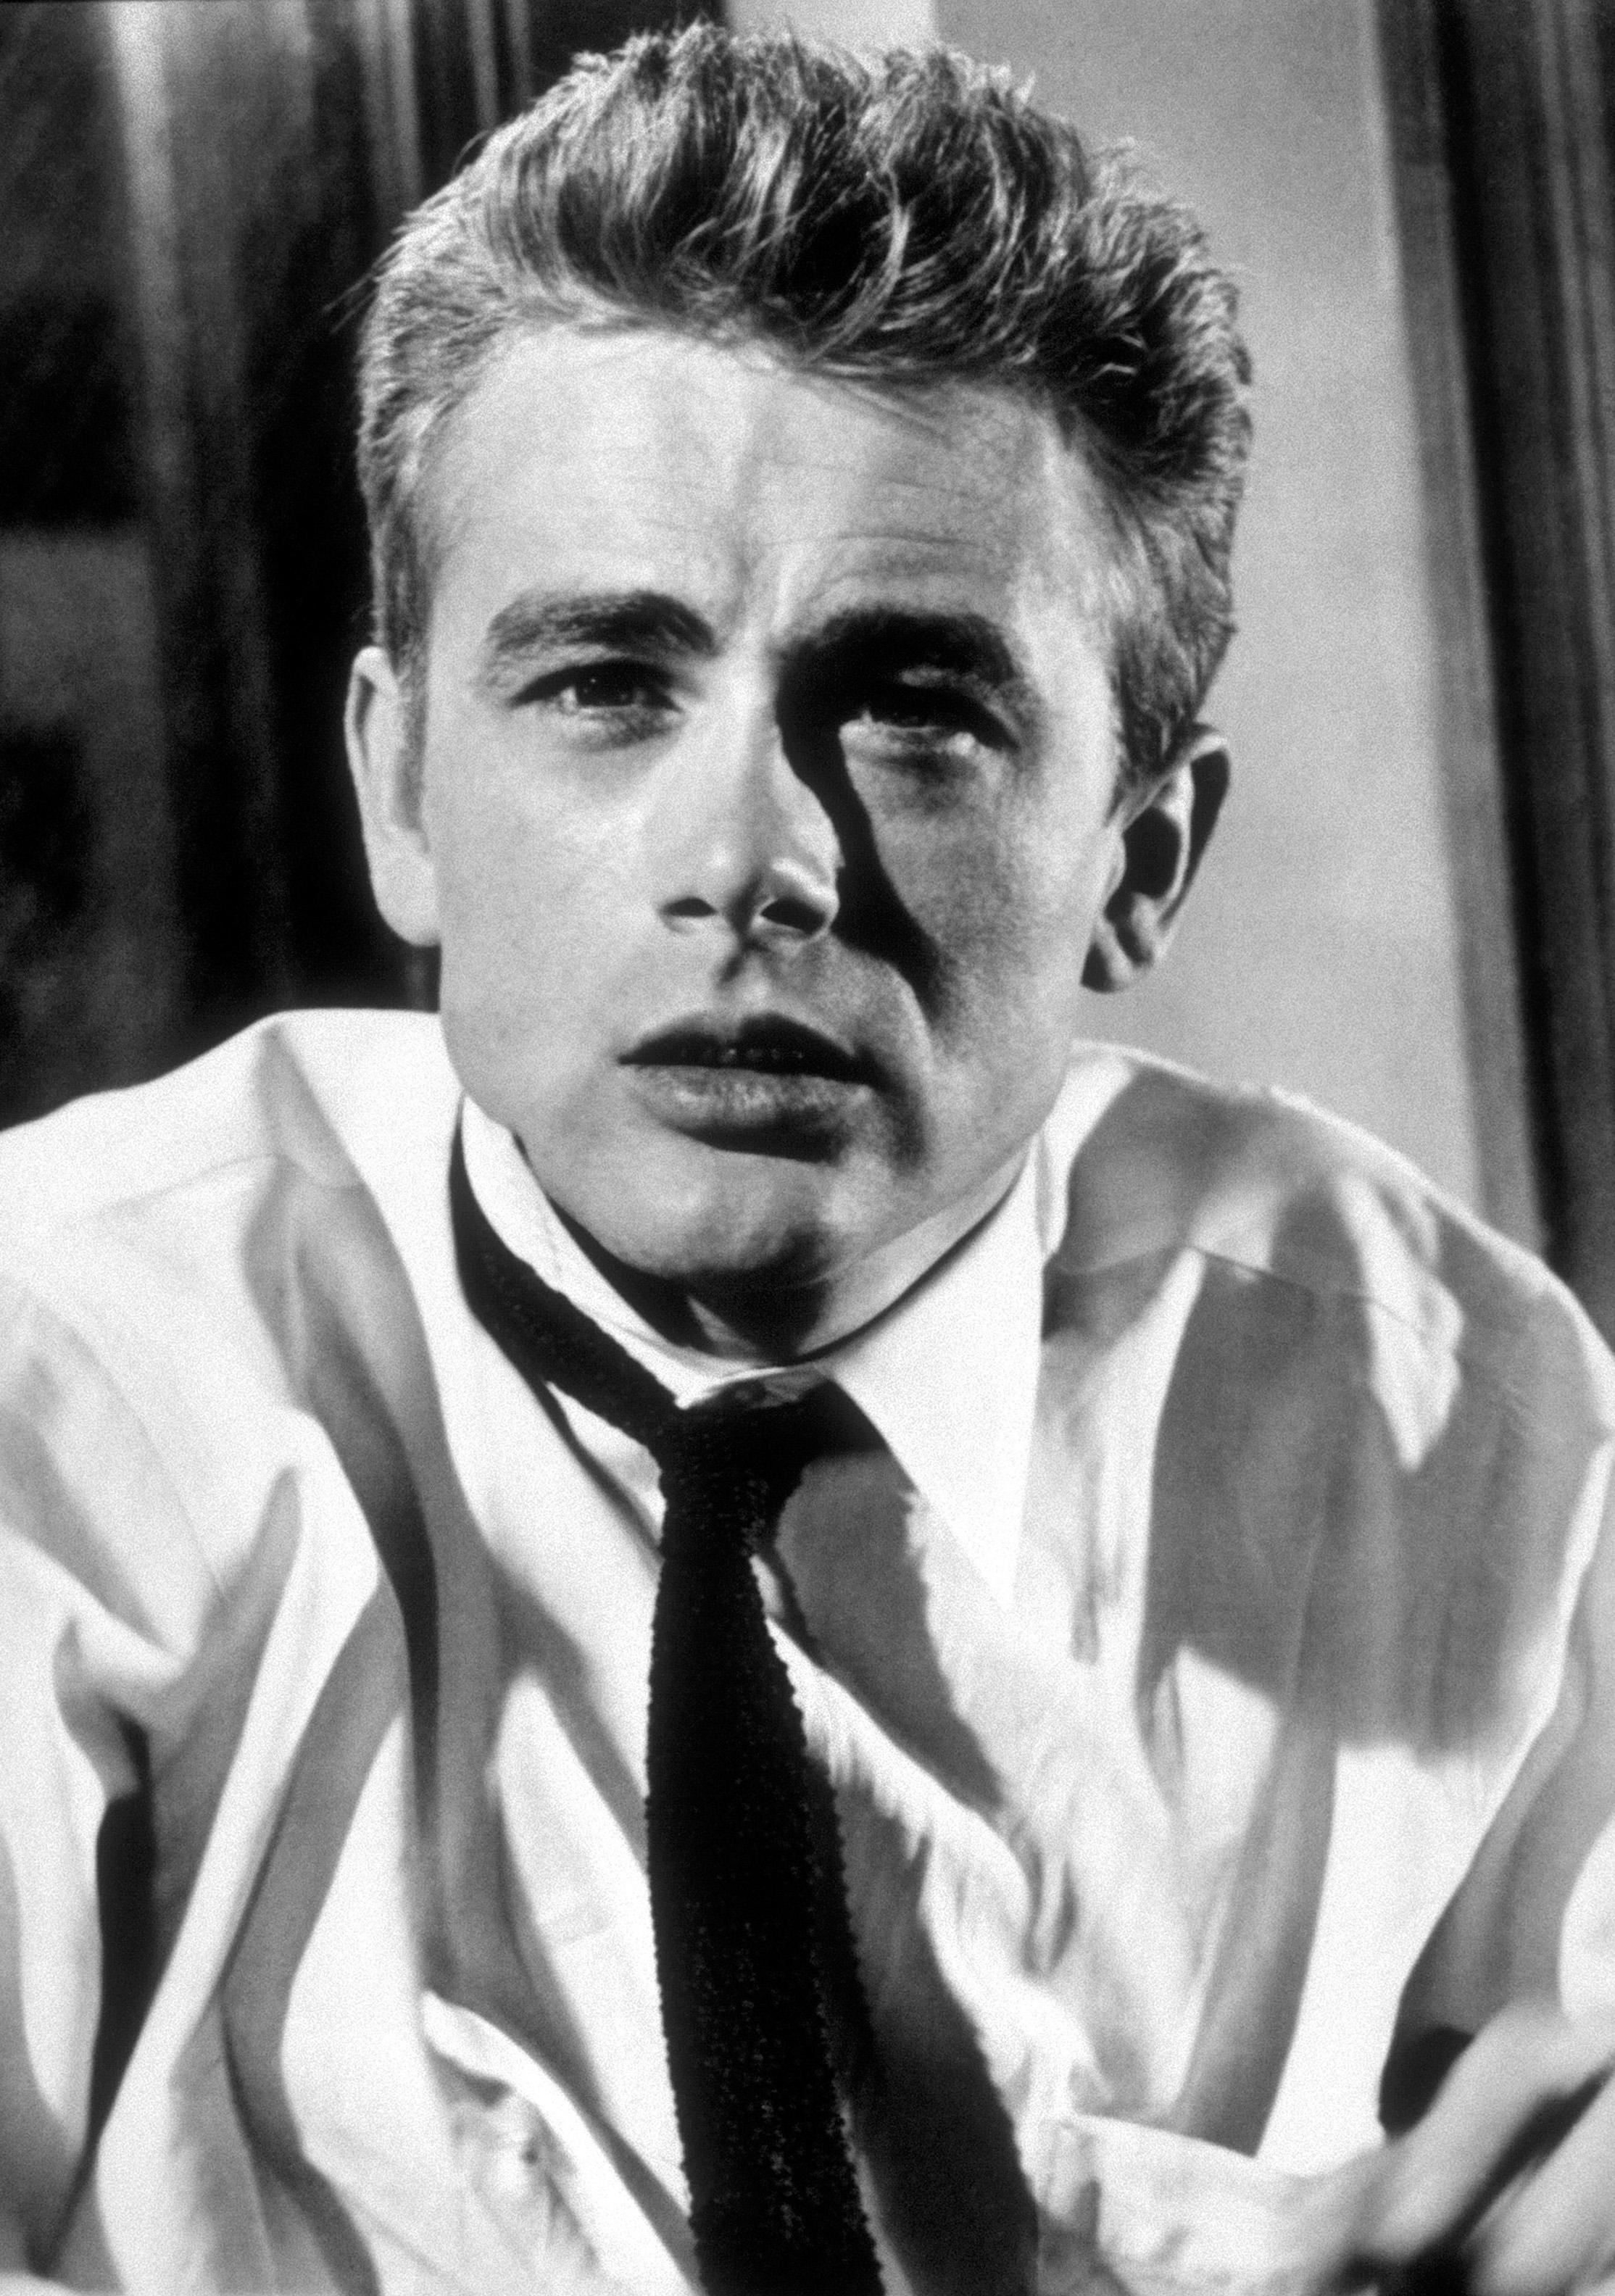 Unknown Black and White Photograph - James Dean in Rebel Without a Cause Globe Photos Fine Art Print